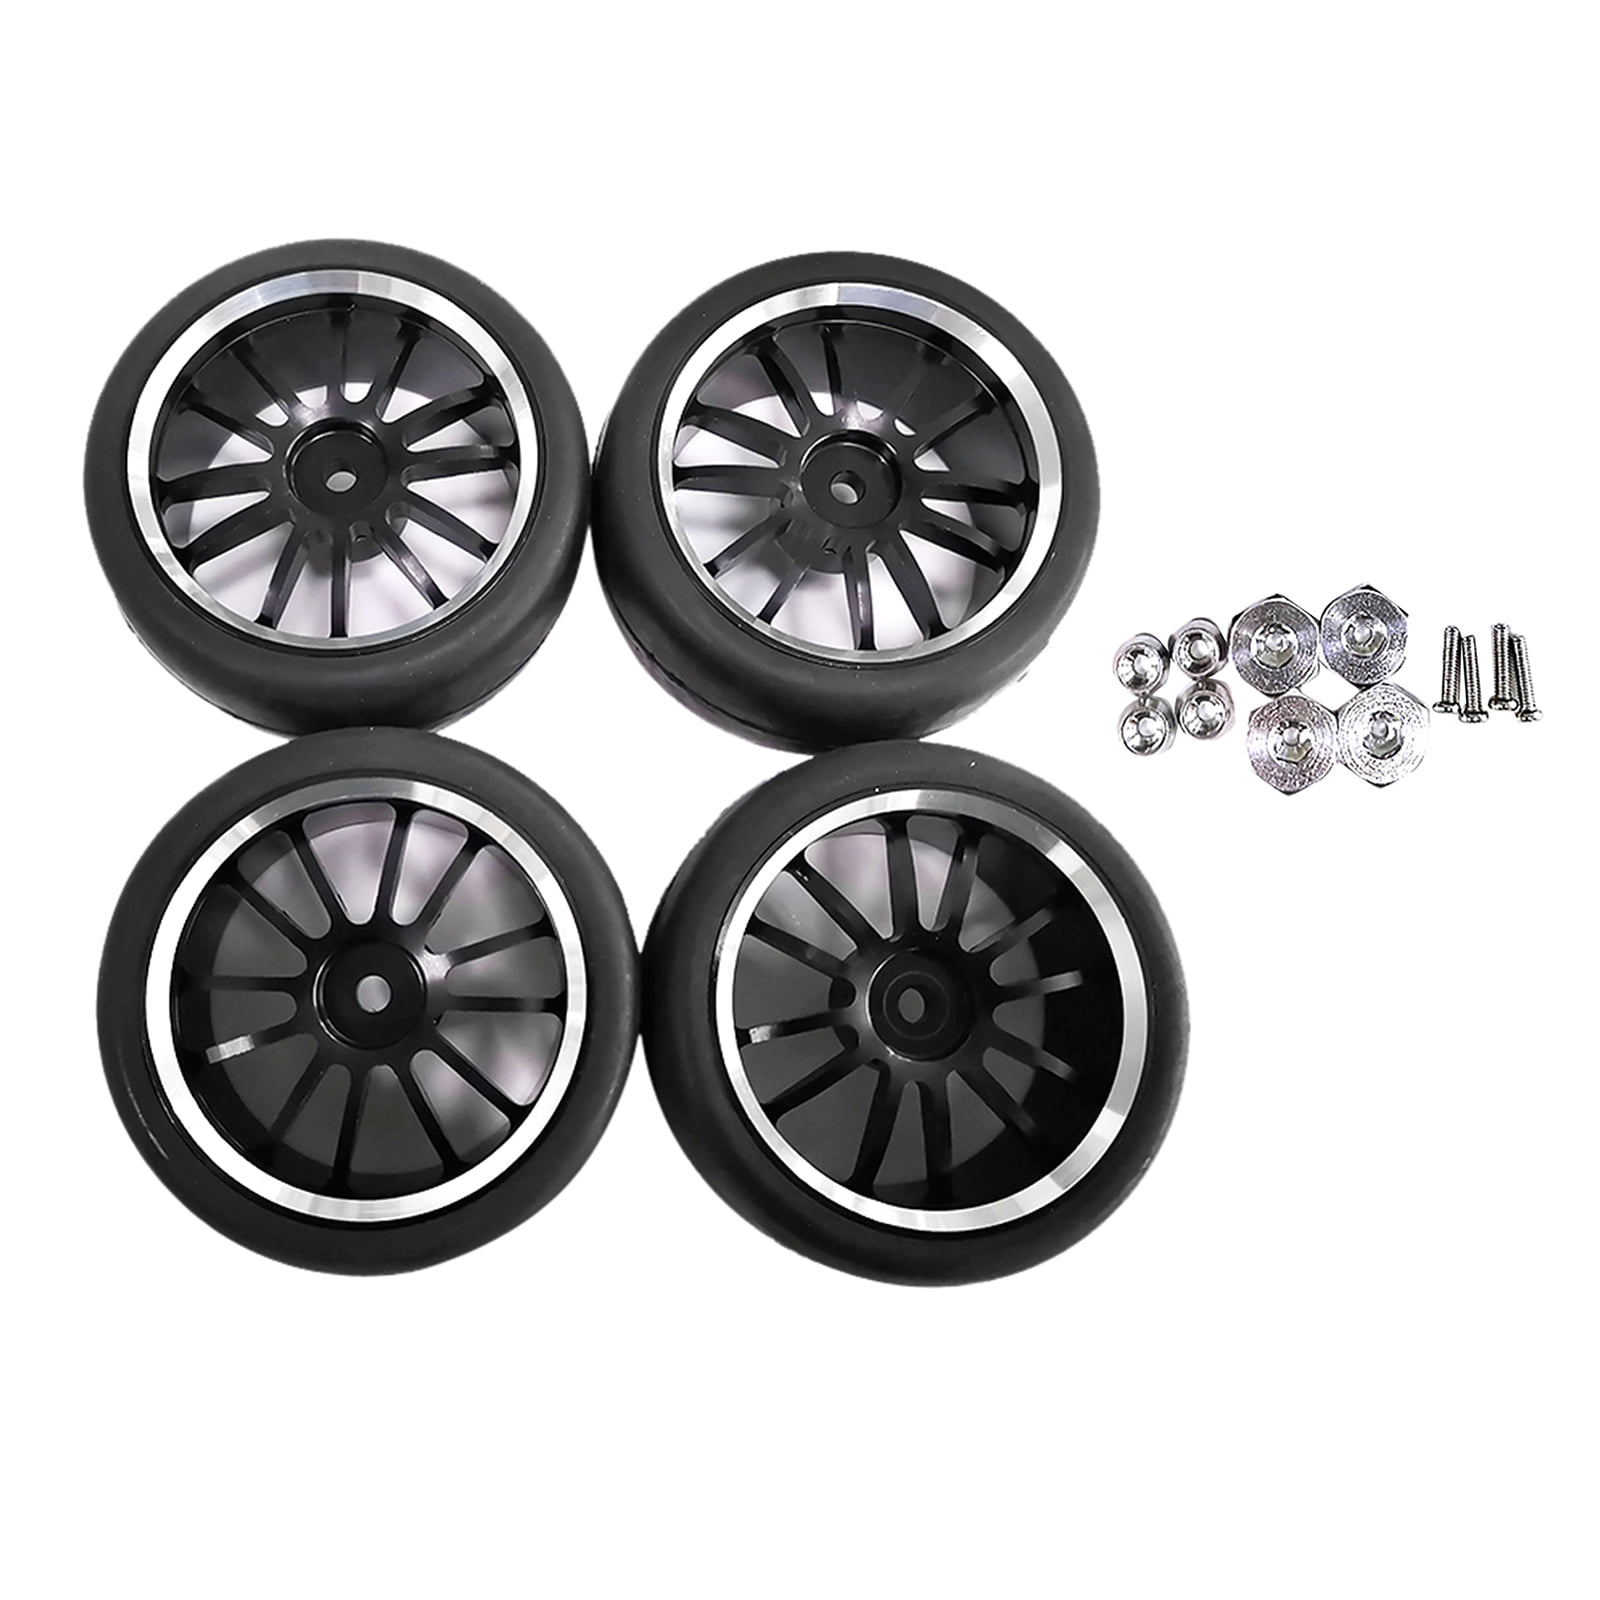 4-Pack RC Car Hub Wheel Rim &Tires for WPL D12 RC Truck Replace Accessories 